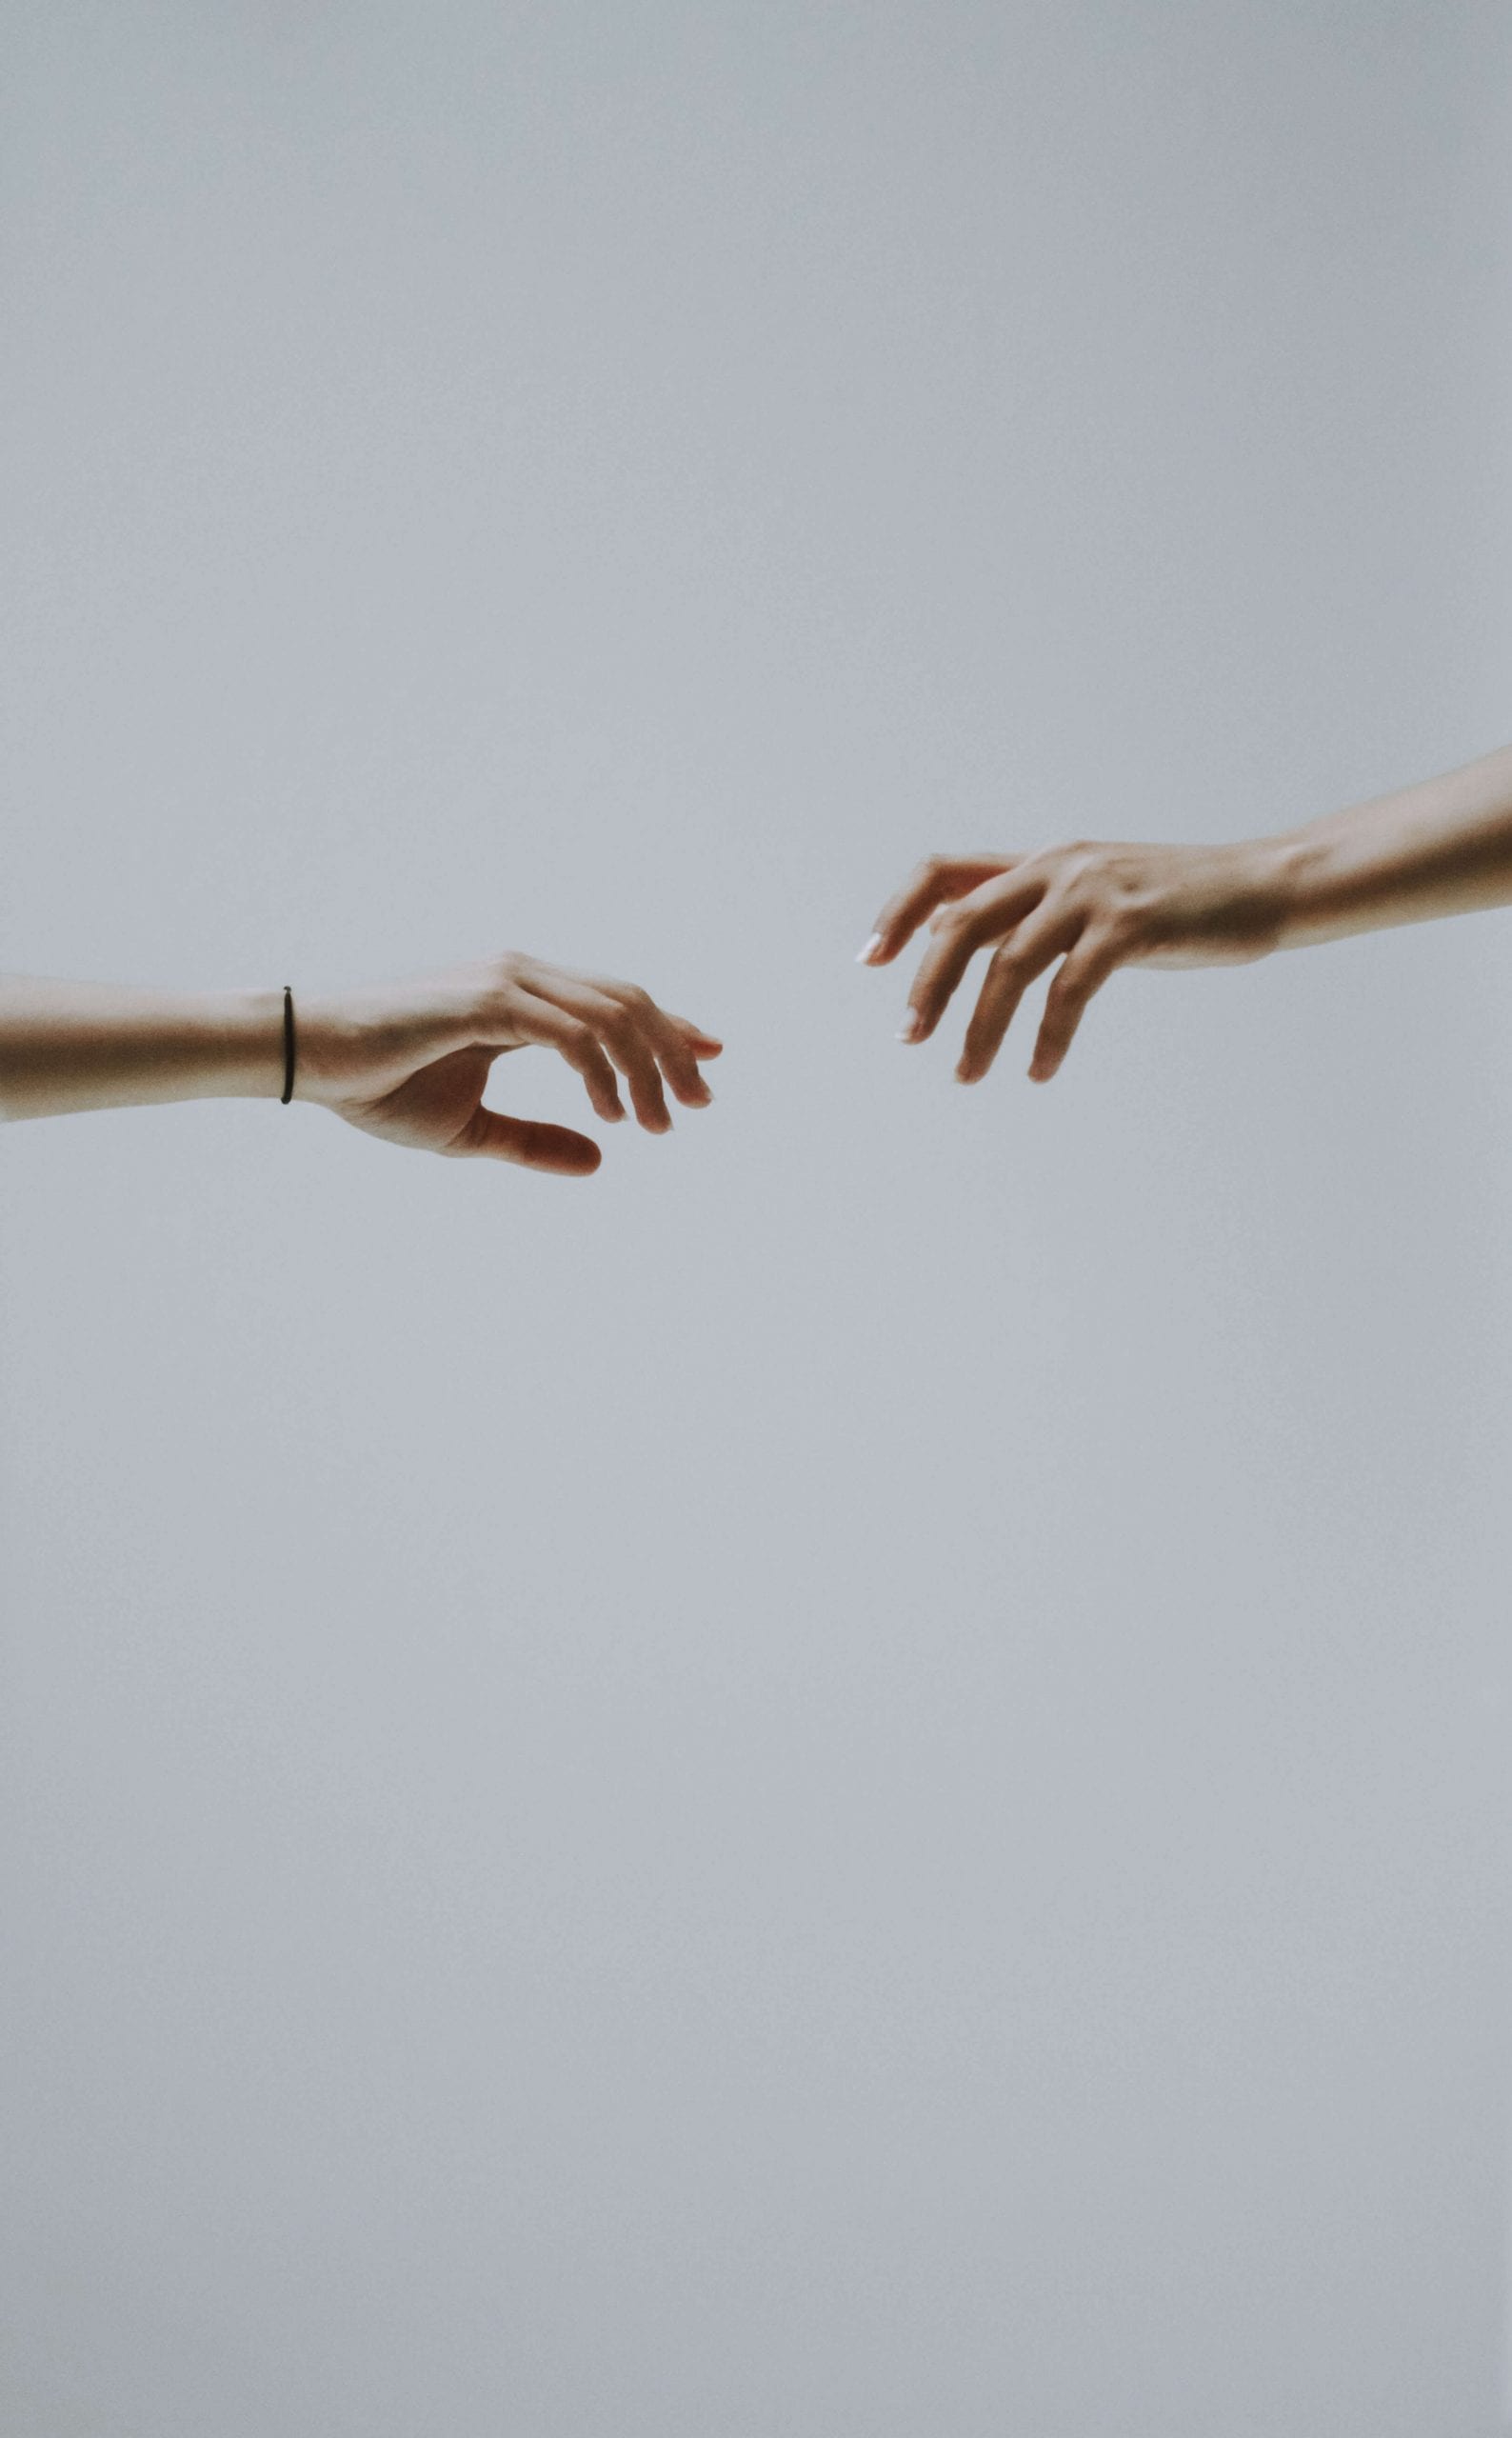 Hands reaching for each other